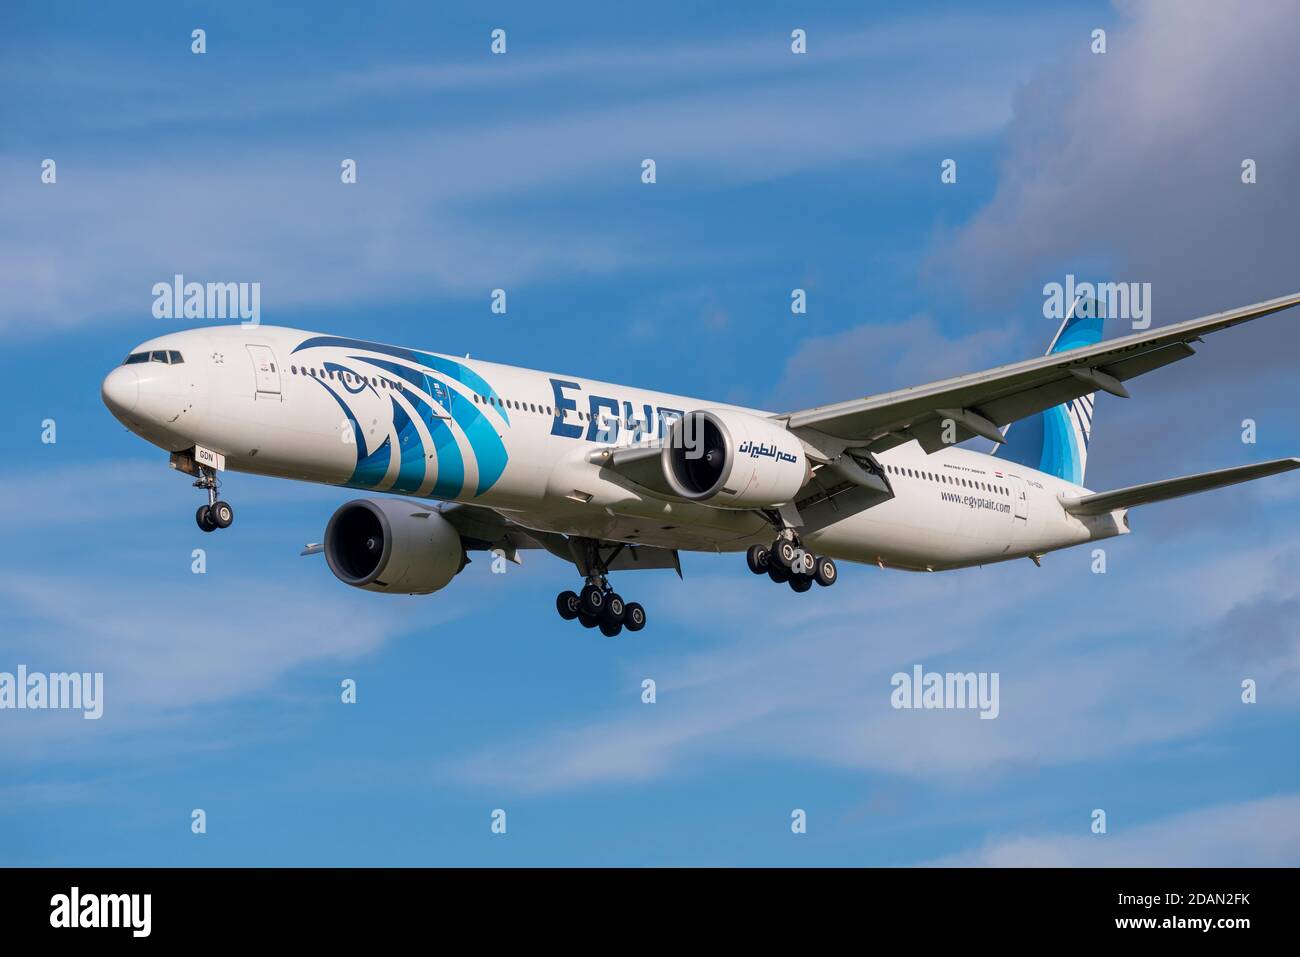 EgyptAir Boeing 777 jet airliner plane SU-GDN on approach to land at London Heathrow Airport, UK, during COVID 19 lockdown. Horus sky deity livery Stock Photo